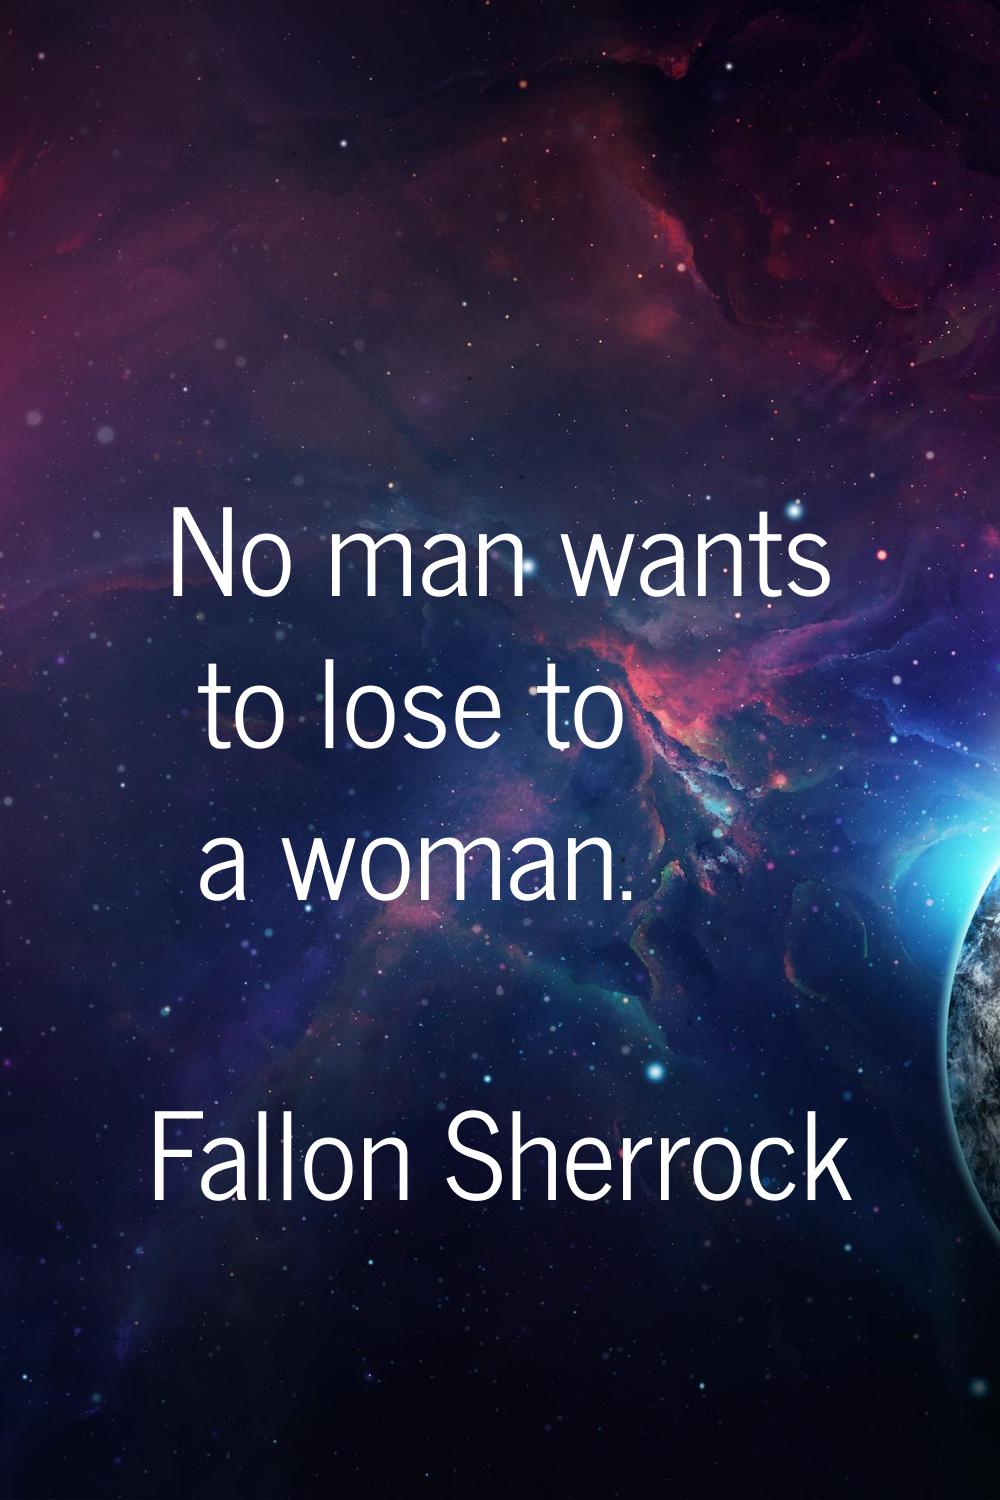 No man wants to lose to a woman.